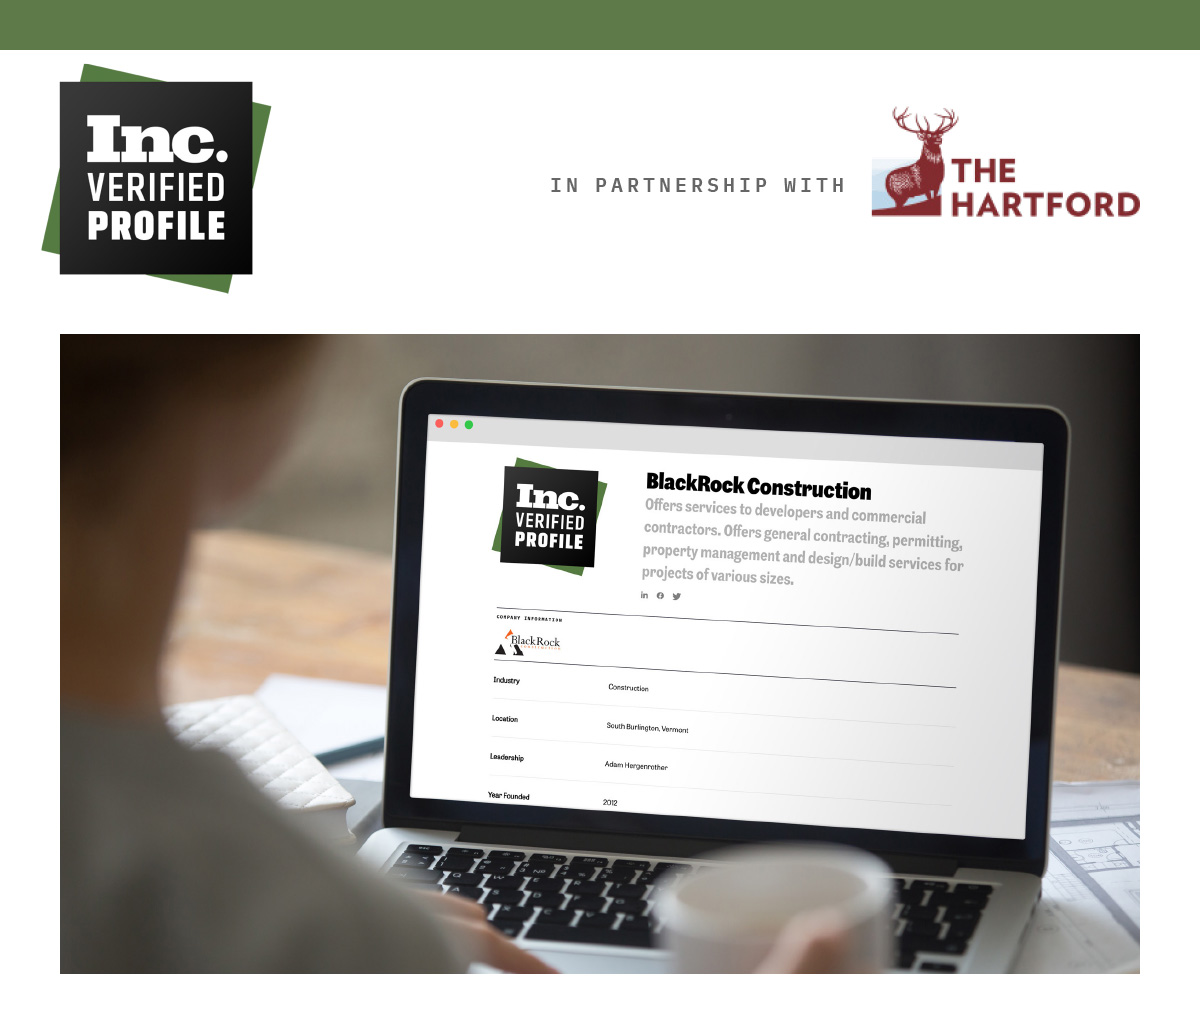 Inc. Verified Profile | in partnership with The Hartford